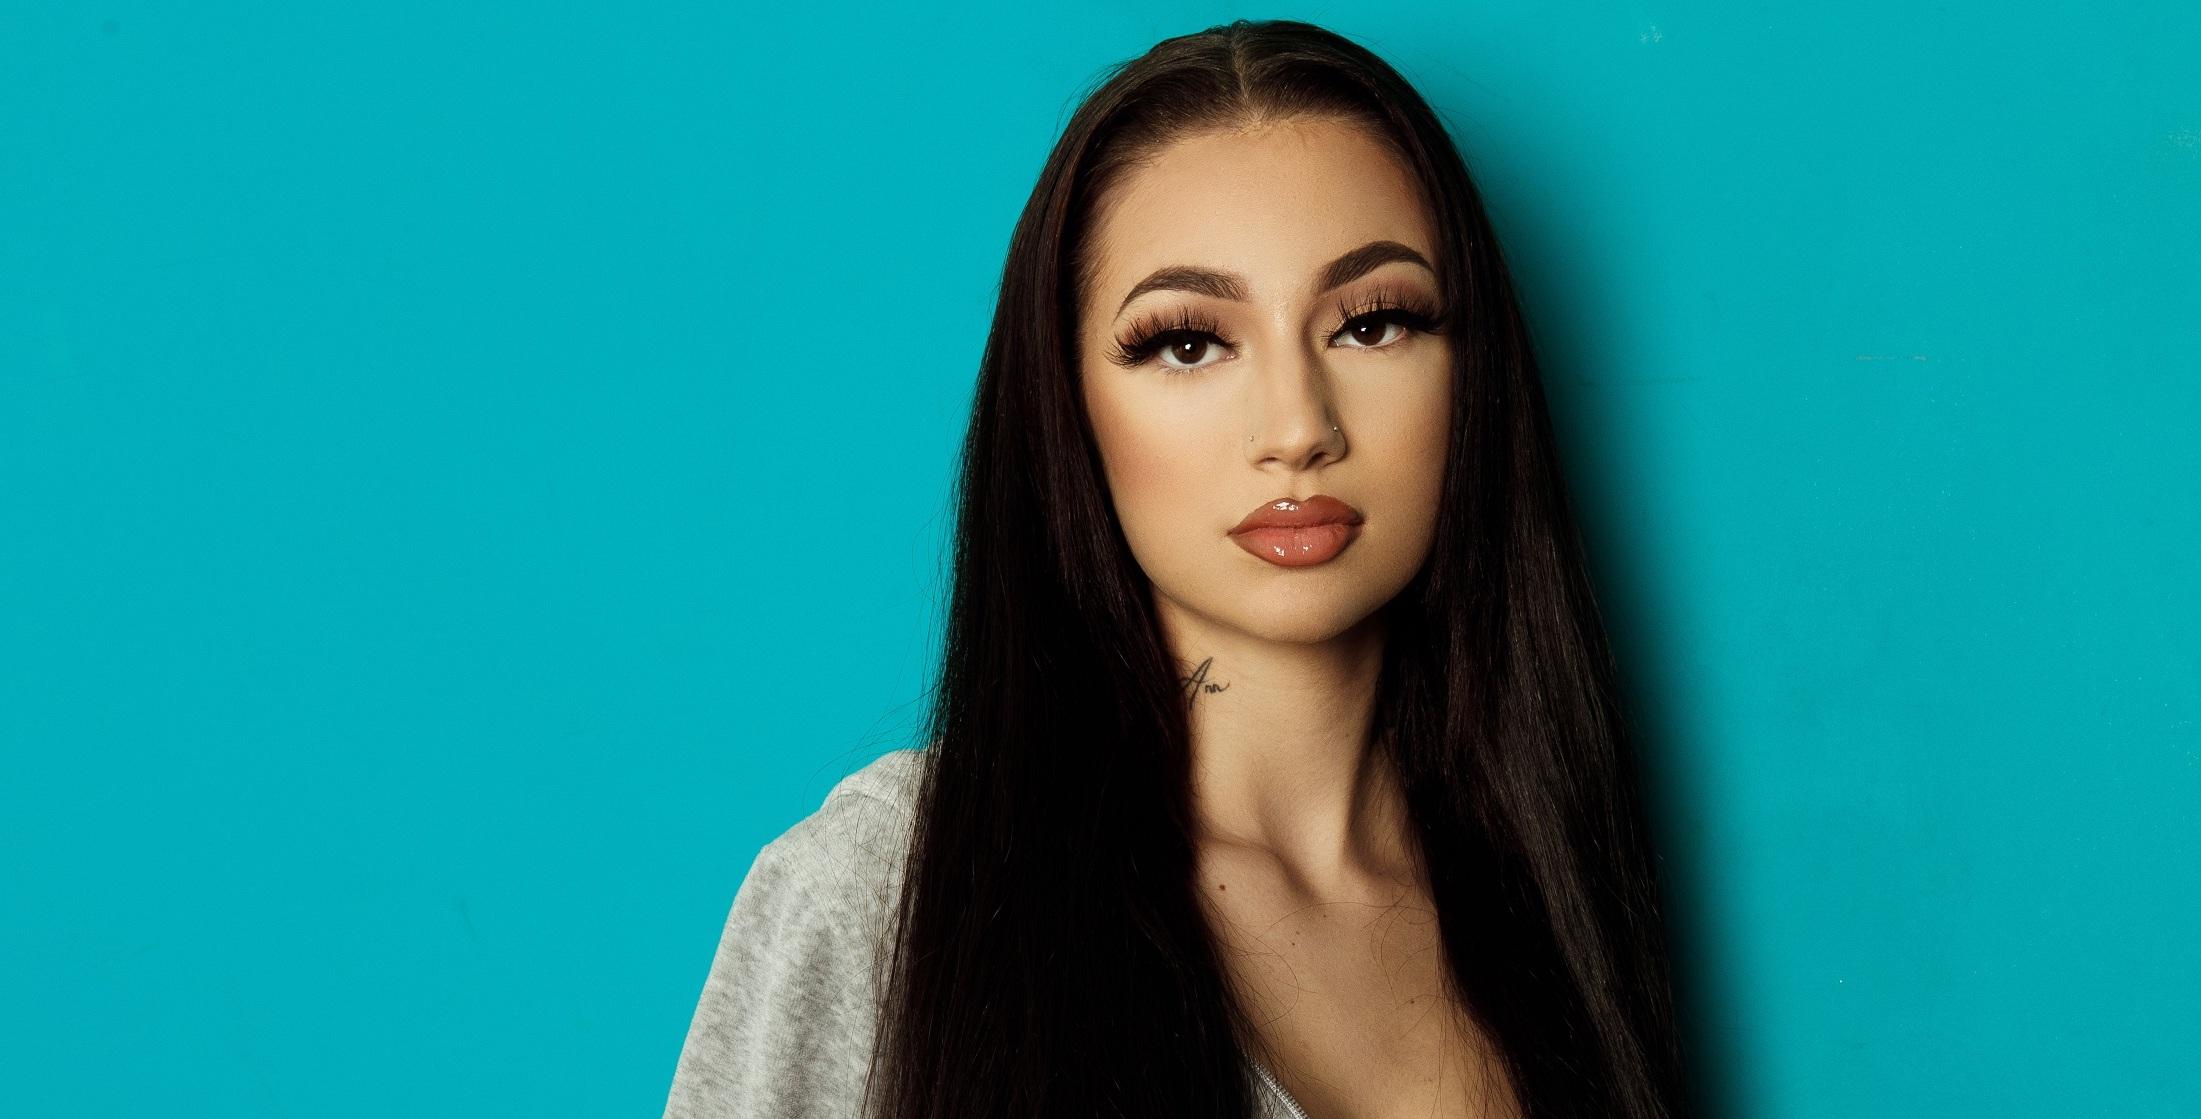 kapok uld pouch What is Bhad Bhabie's Net Worth? She Just Broke an OnlyFans Earnings Record